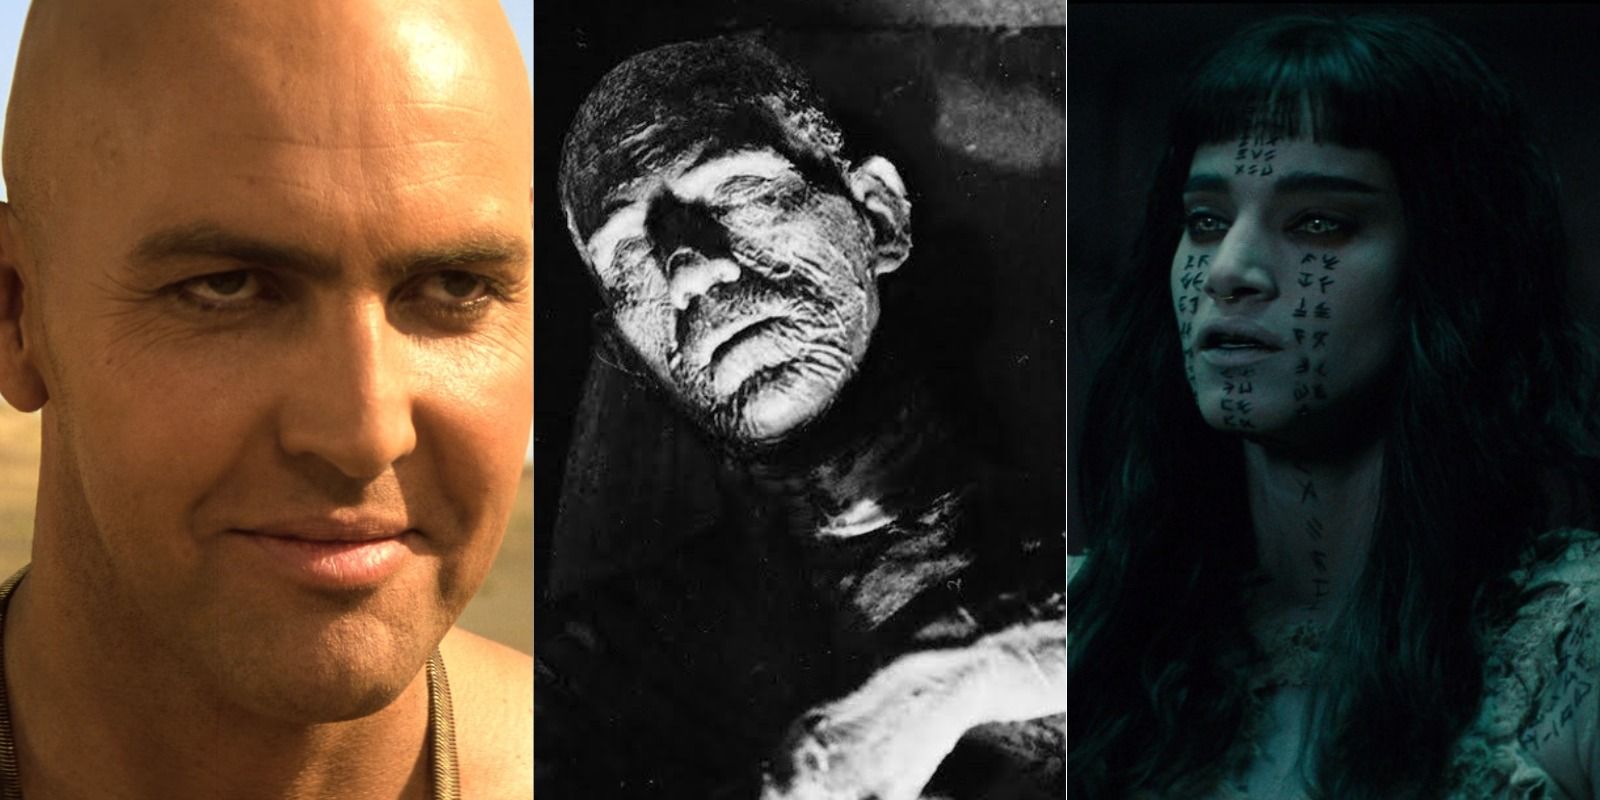 actors that where in the mummy movies